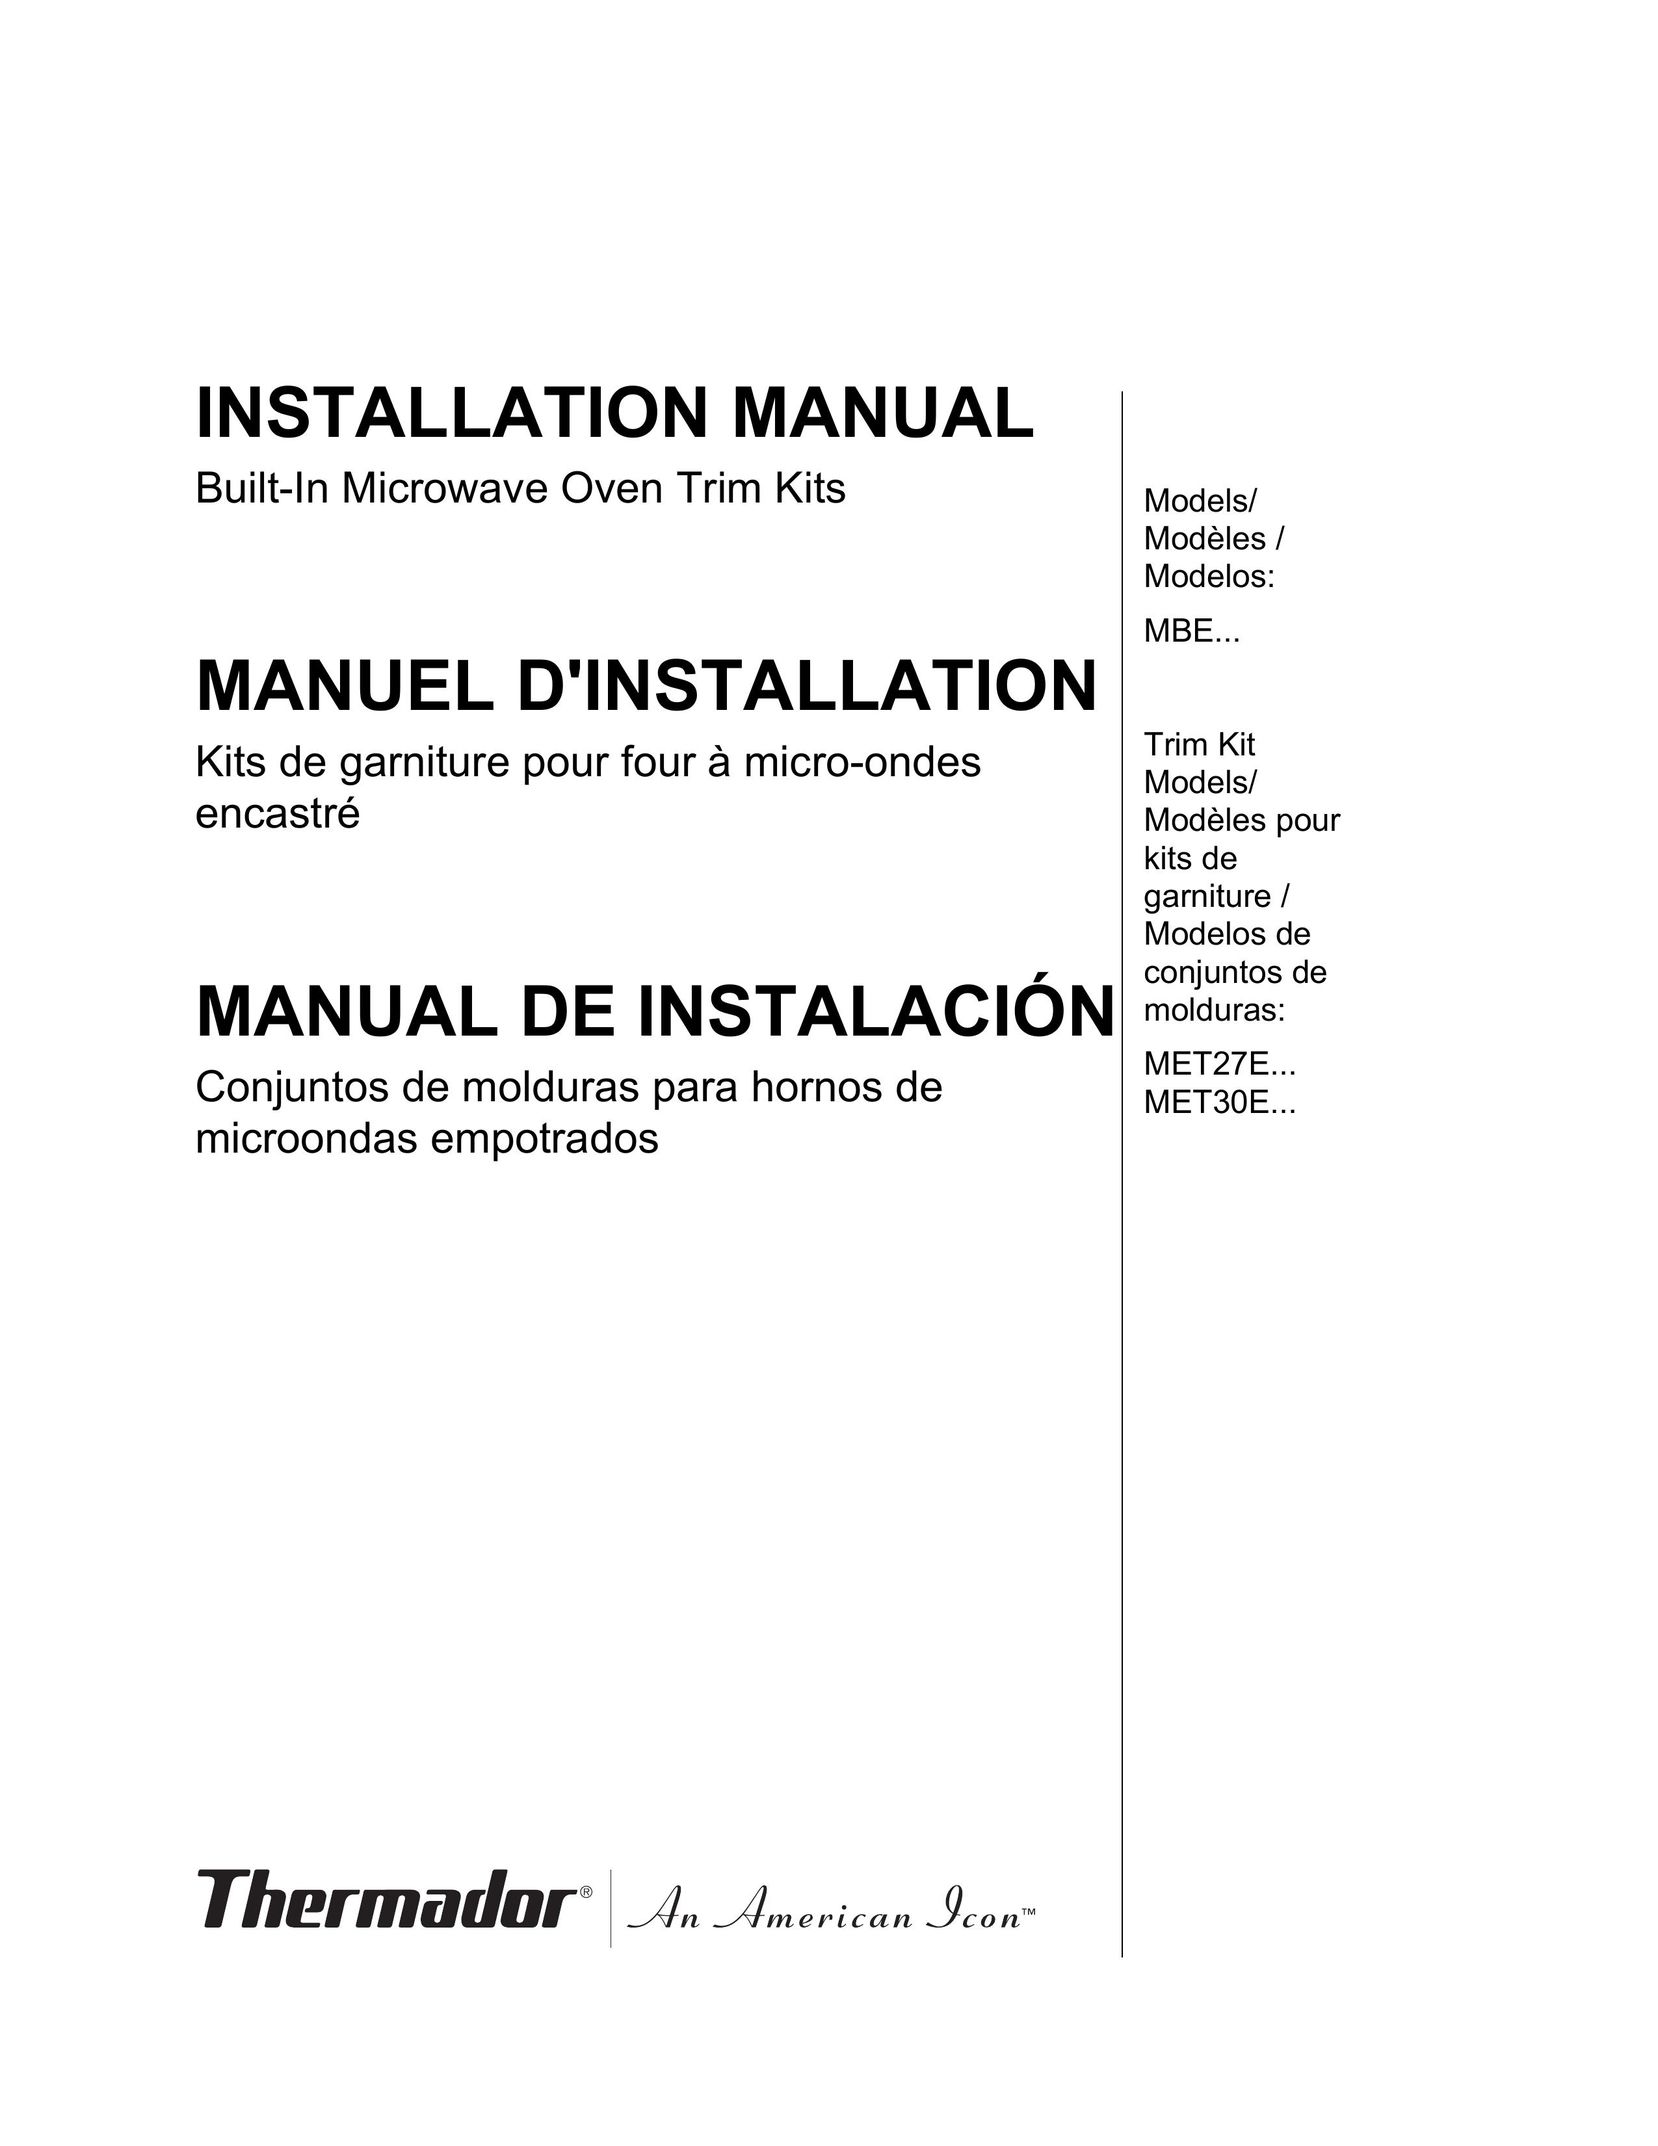 Thermador MET27E Microwave Oven User Manual